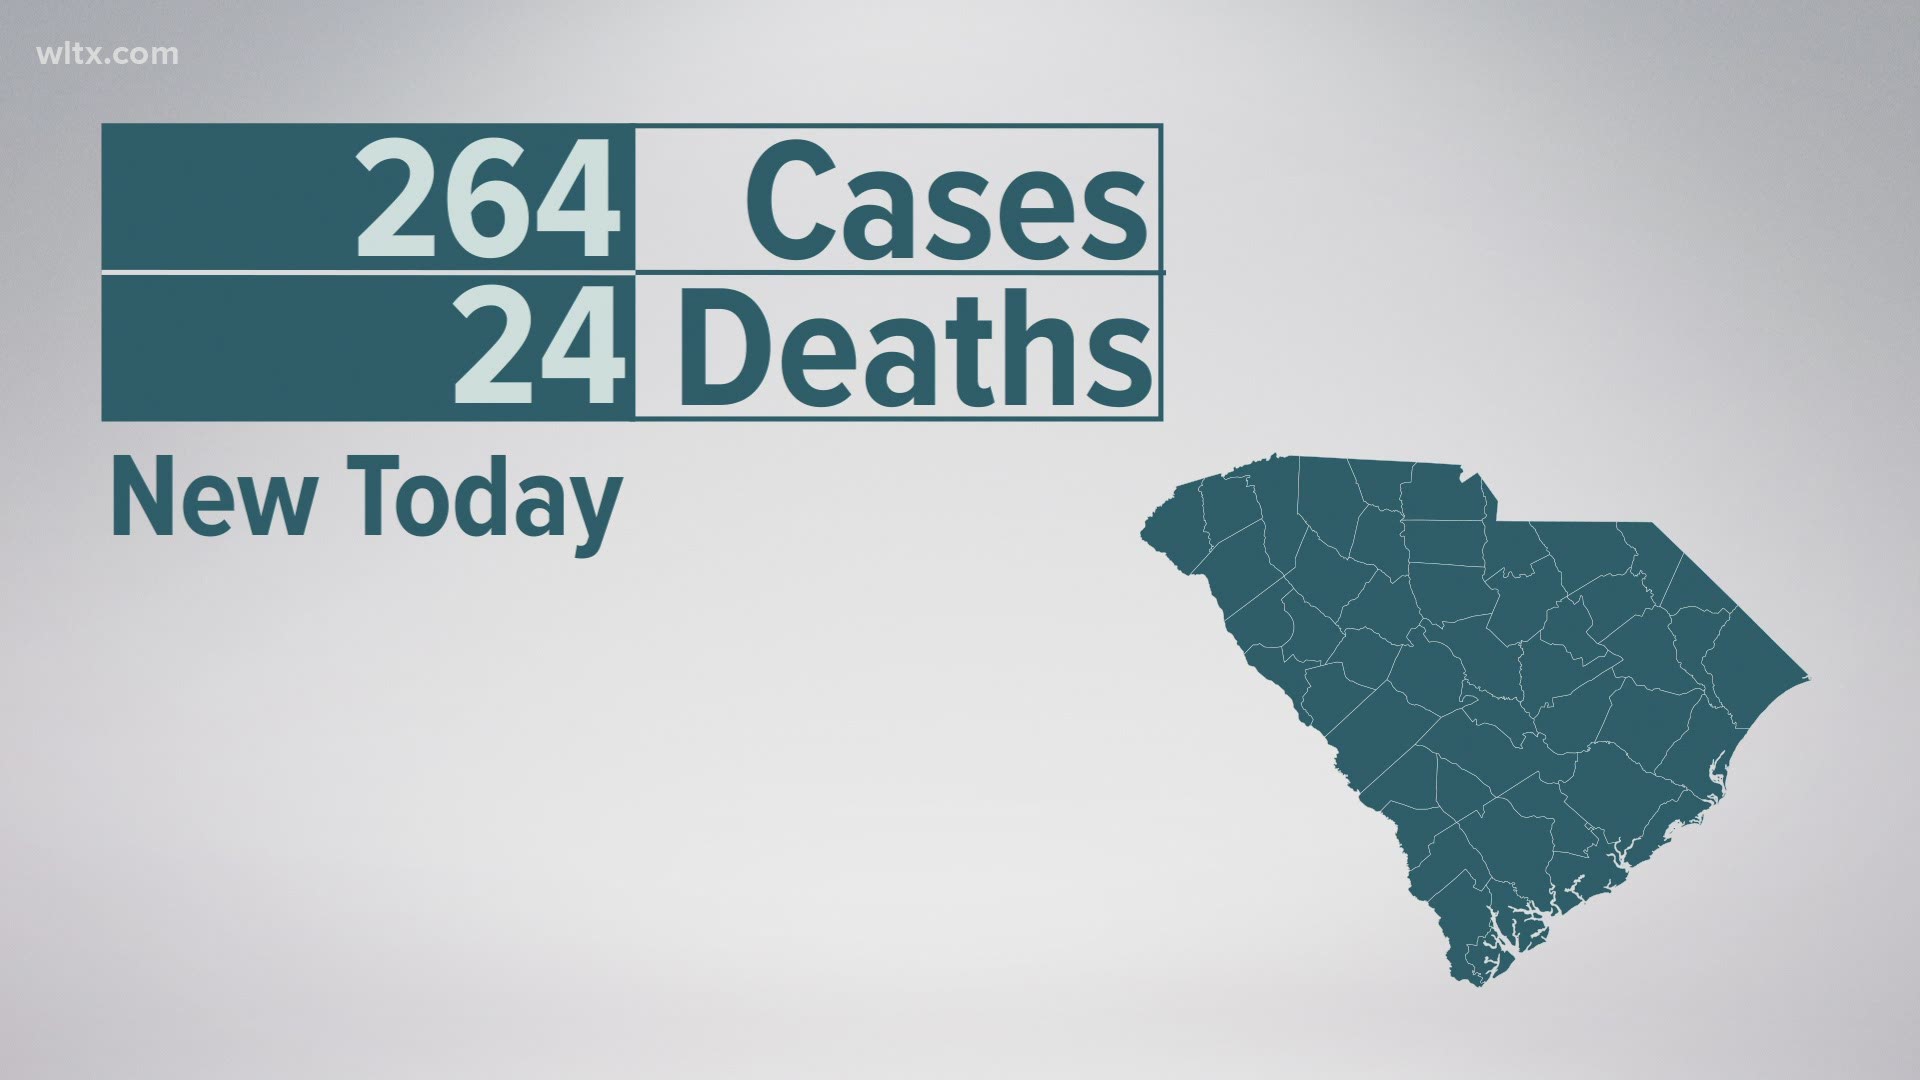 There were 264 new cases Thursday and 24 additional deaths.